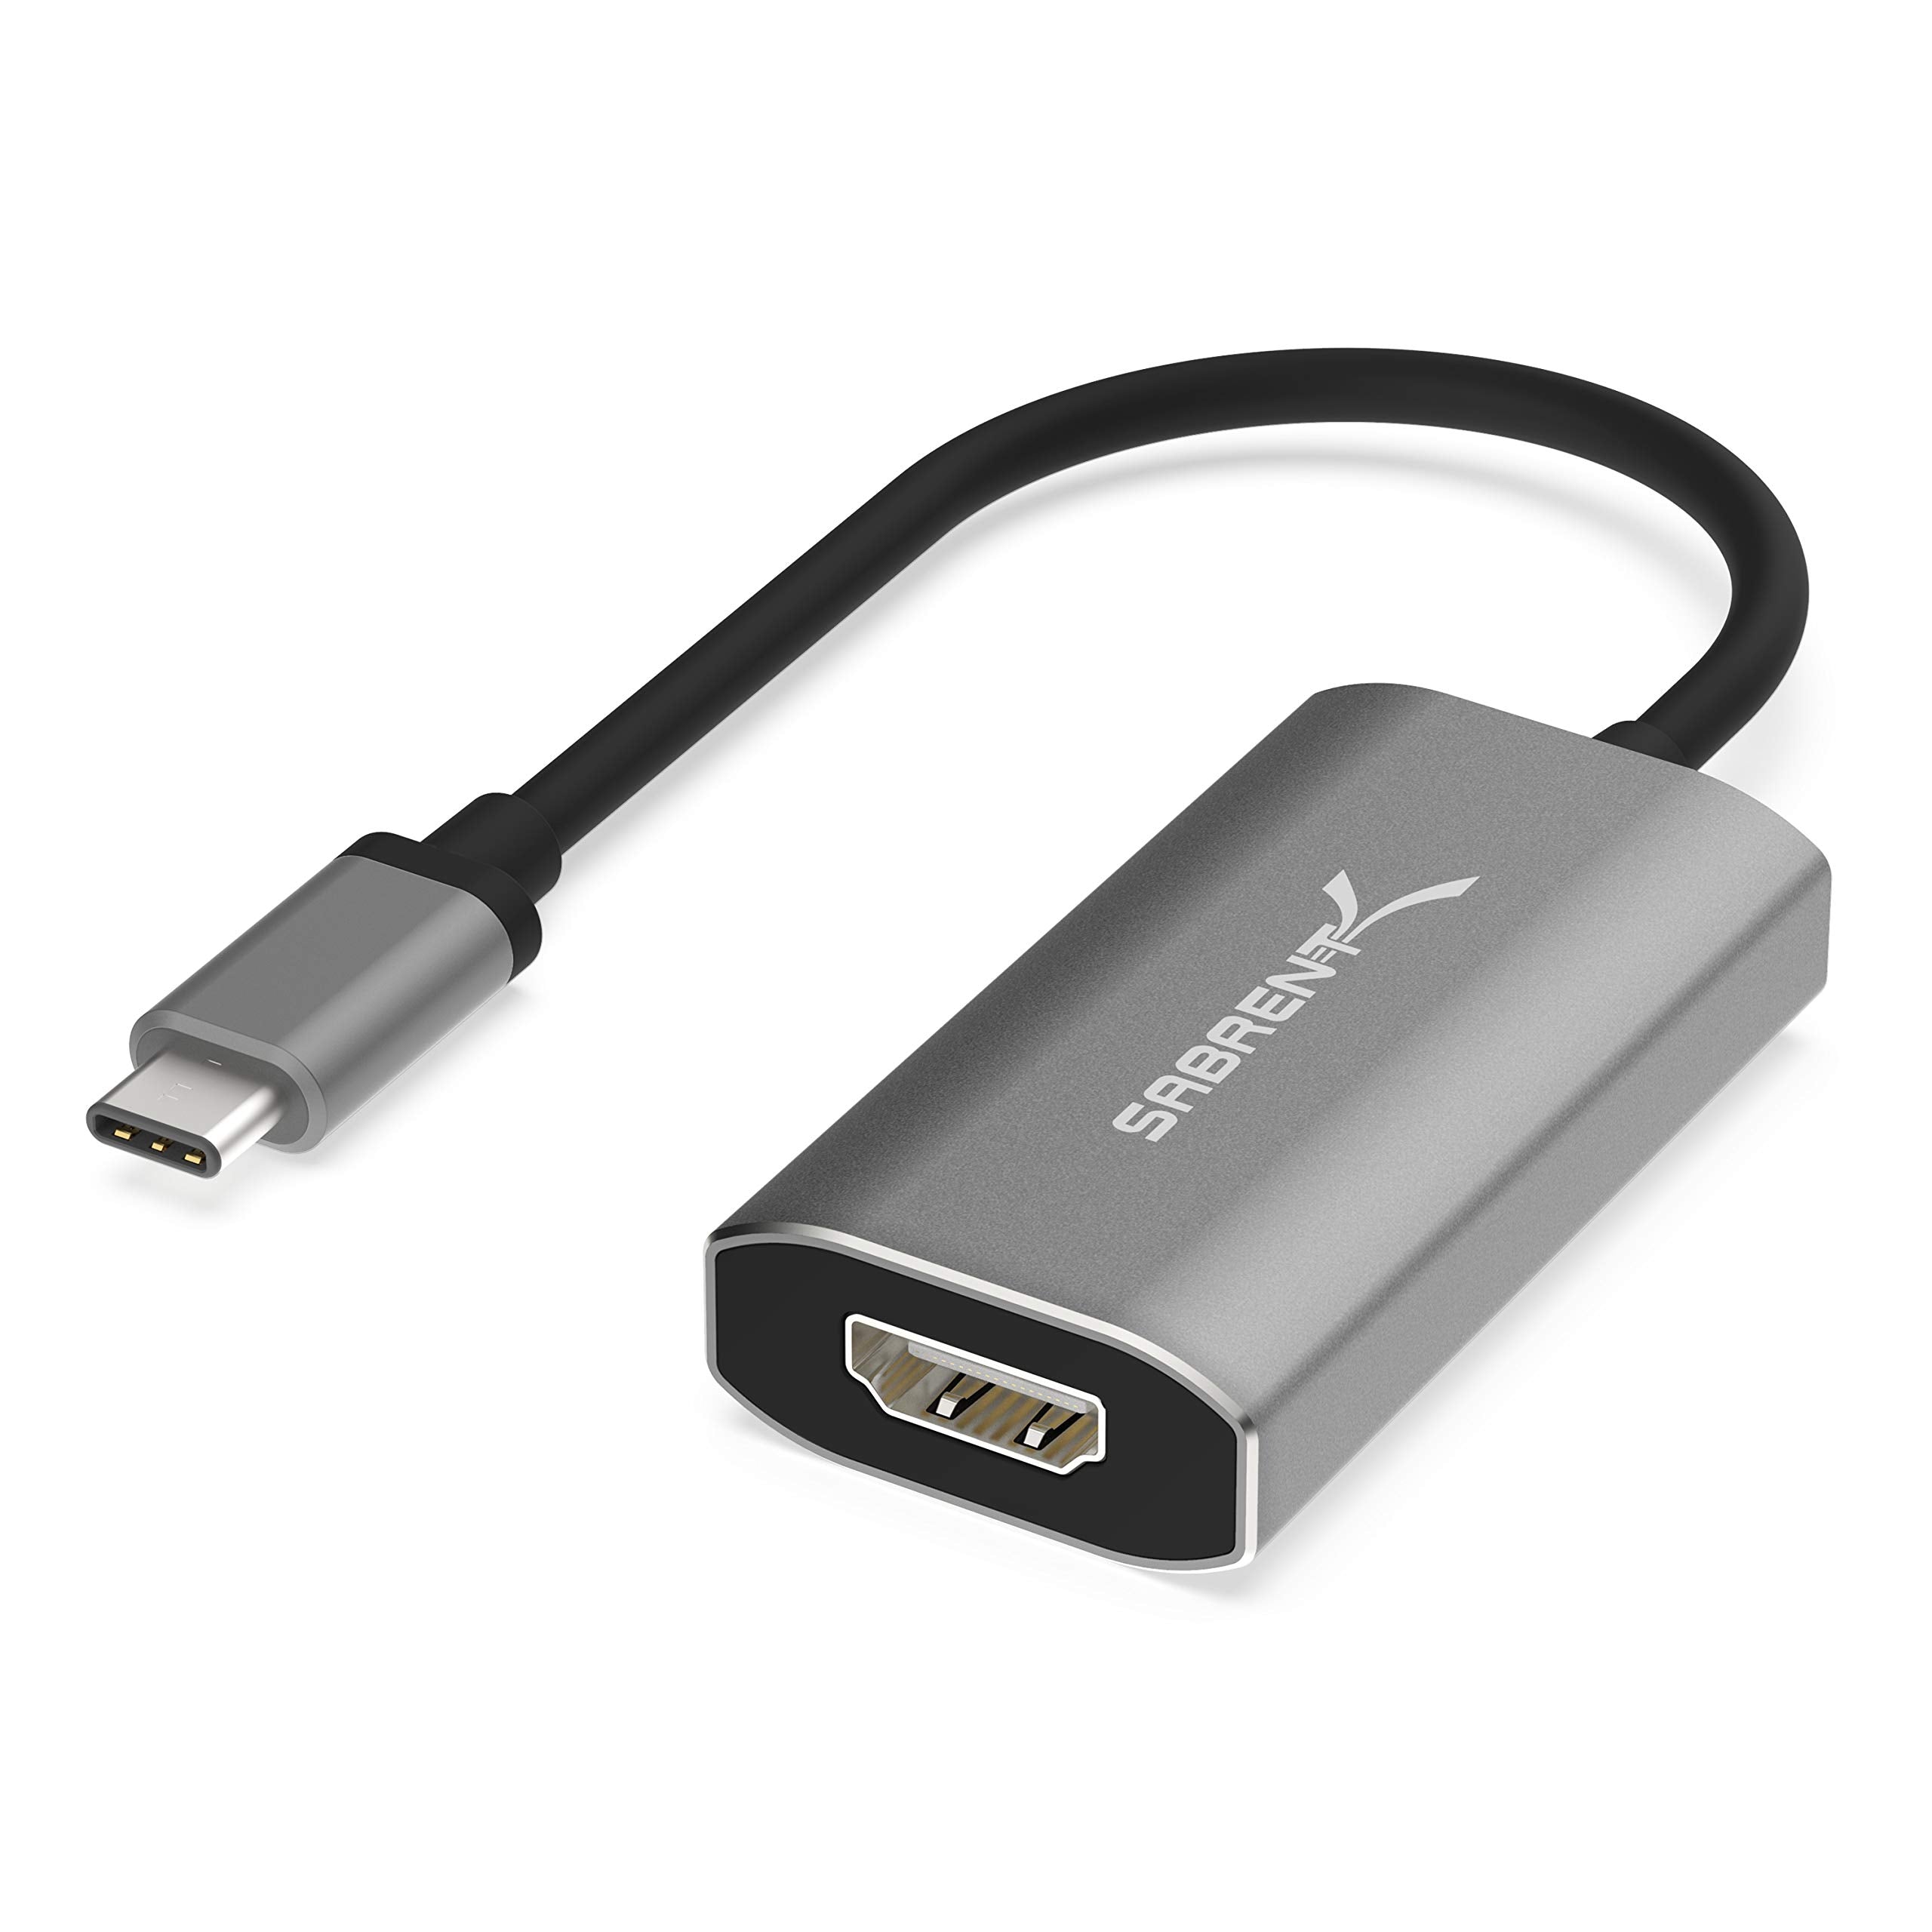 HDMI to USB adapter